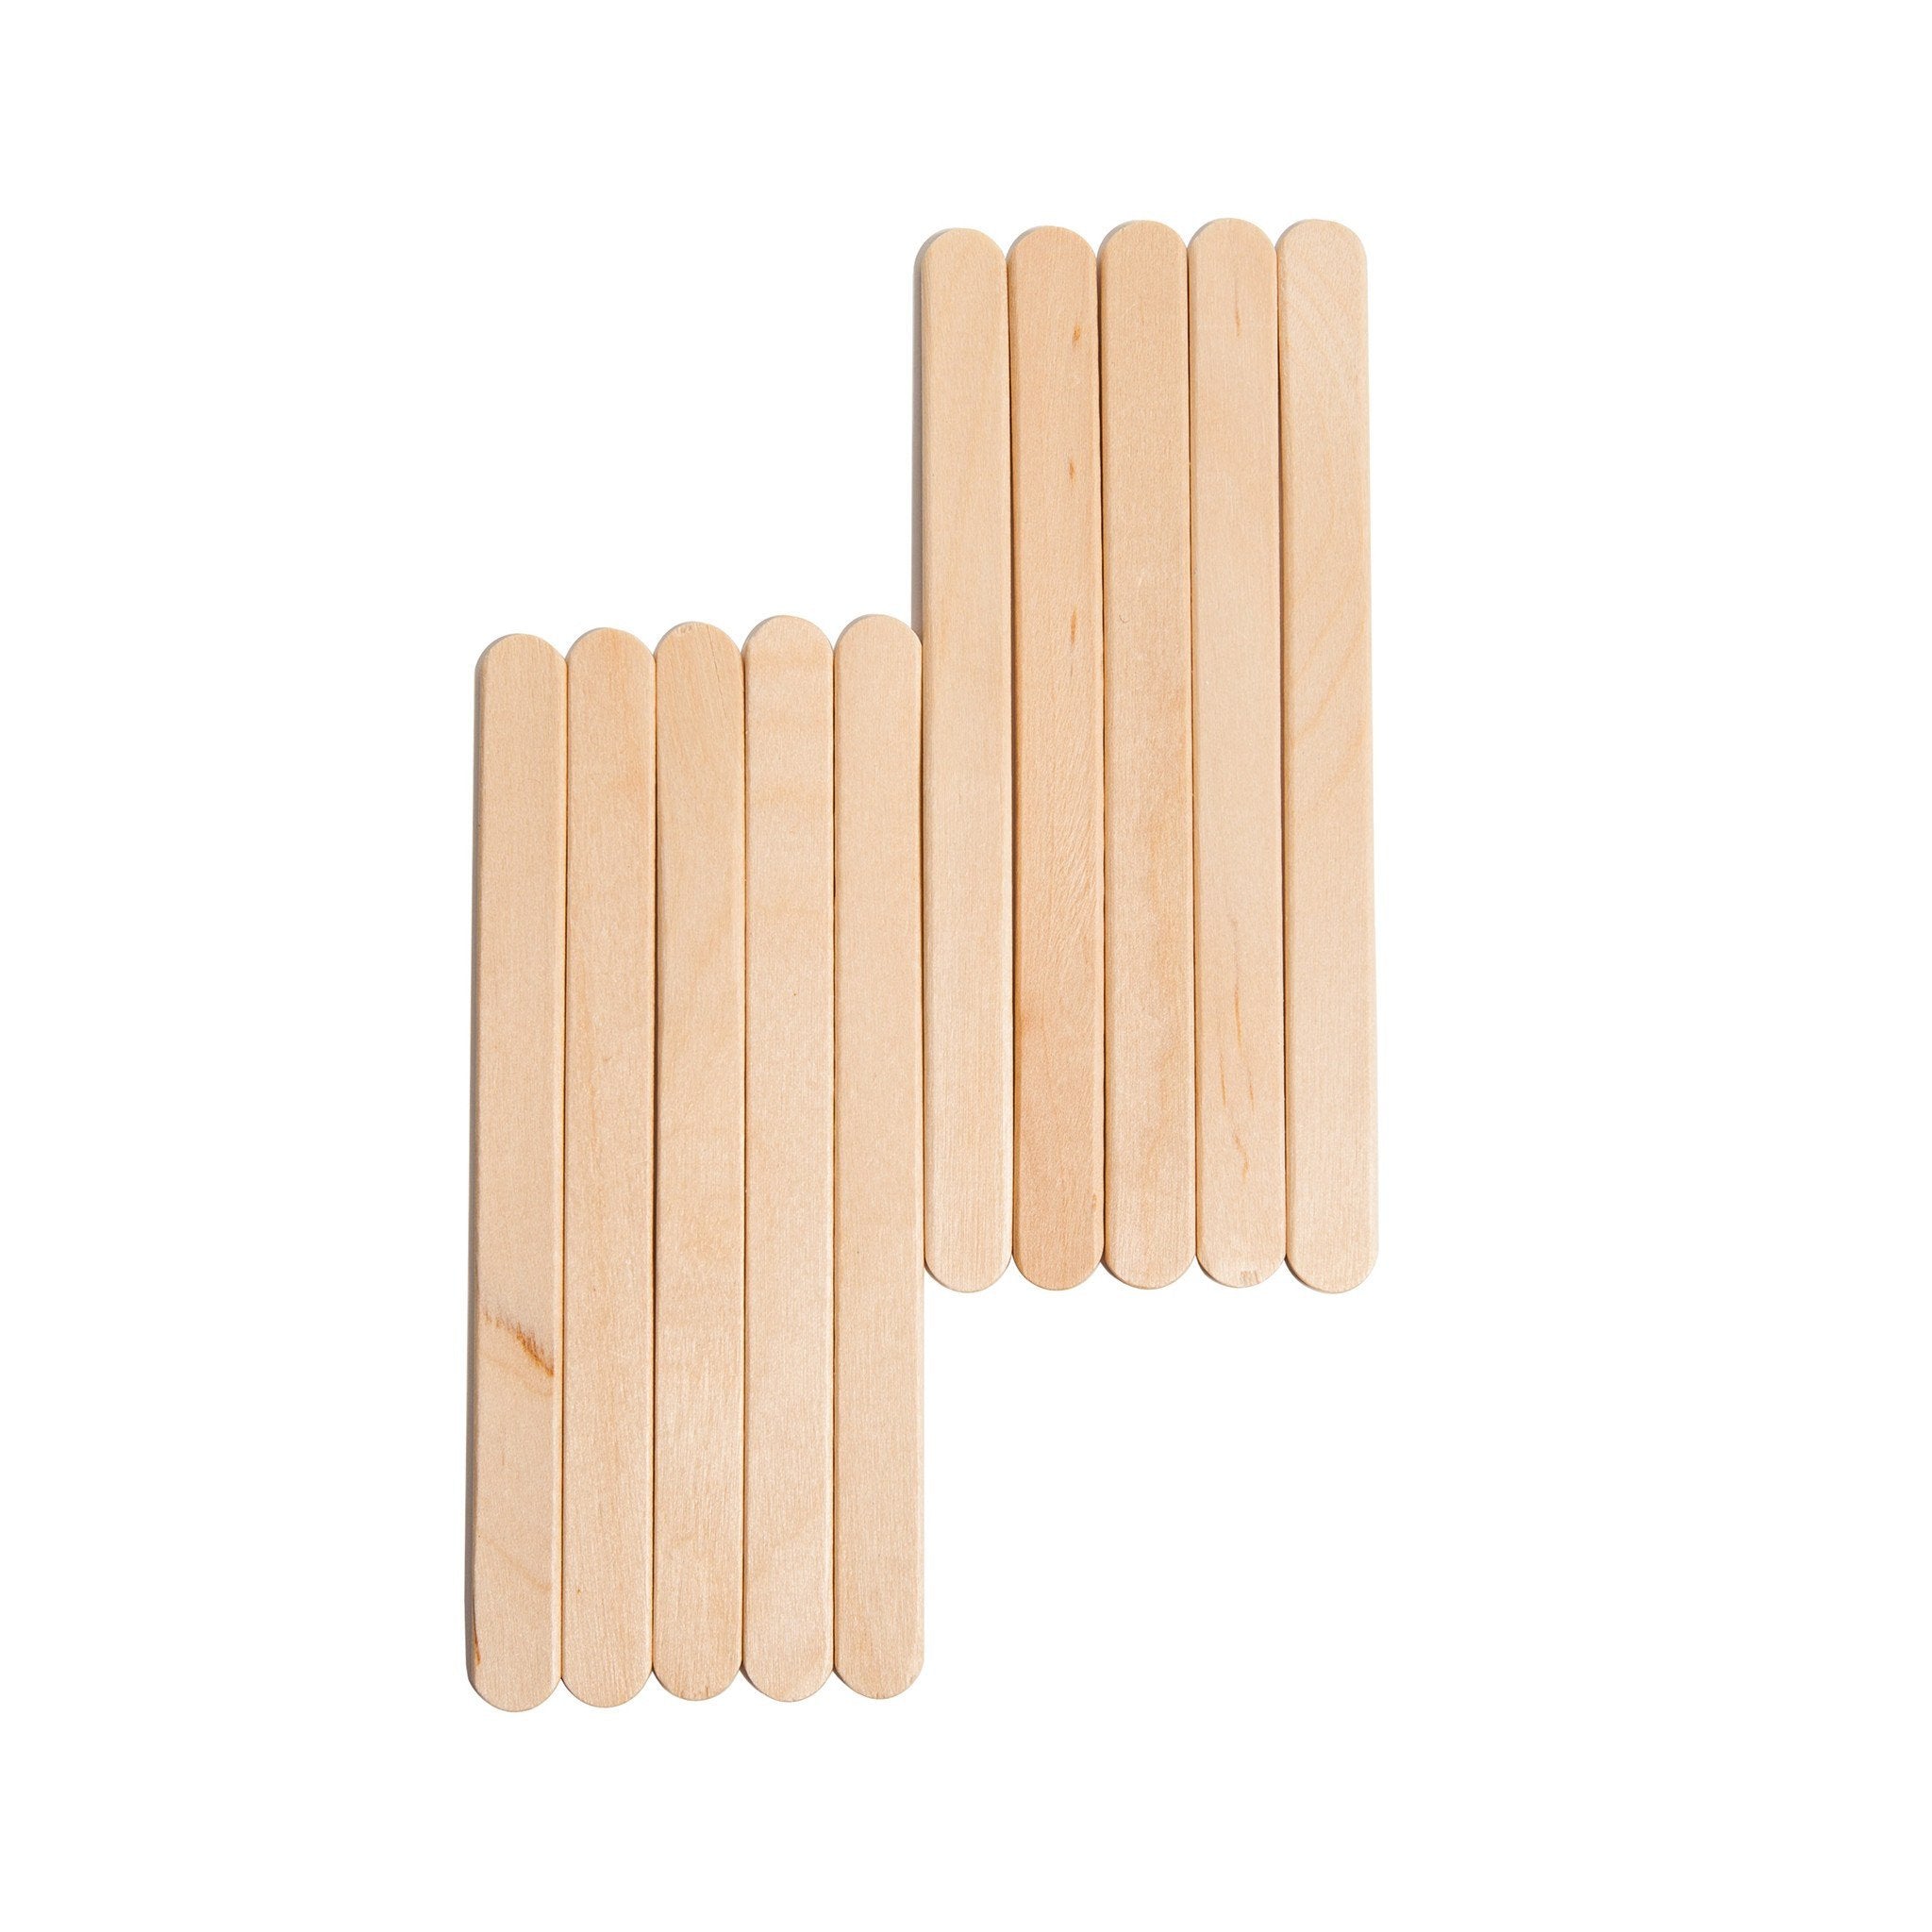 Treated* Wooden Popsicle Sticks / Spatulas - Stage and Screen FX